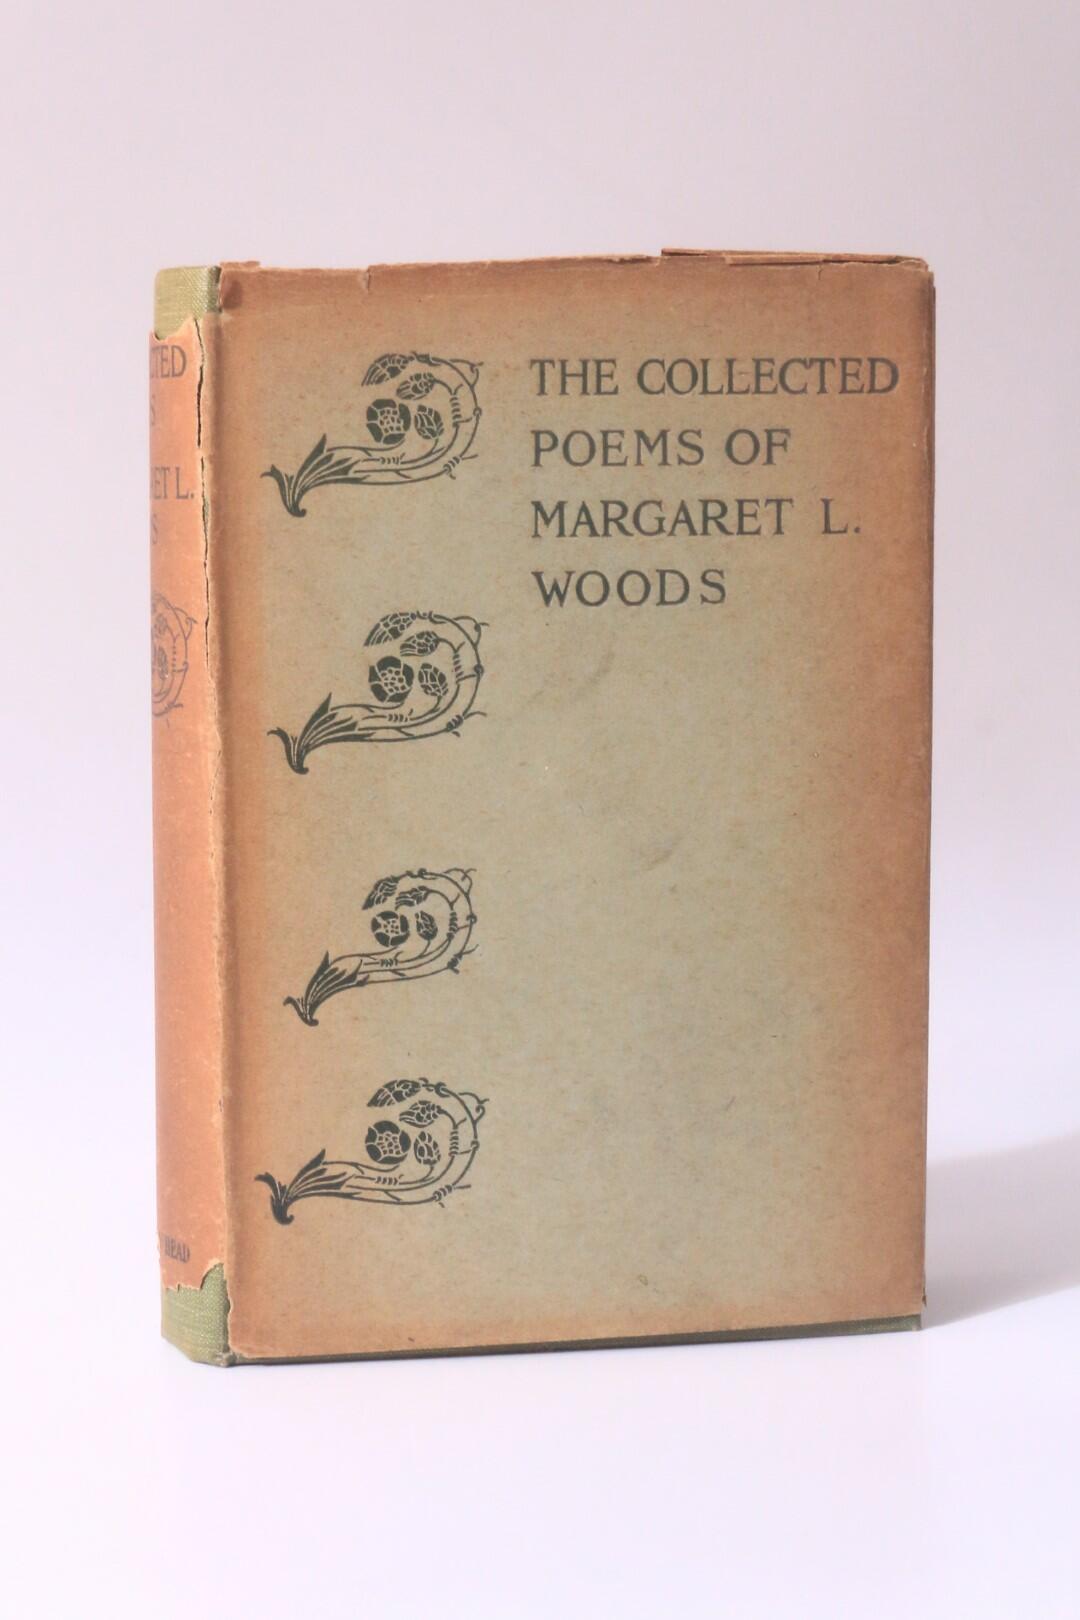 Margaret L. Woods - The Collected Poems - John Lane / Bodley Head, 1914, First Edition.